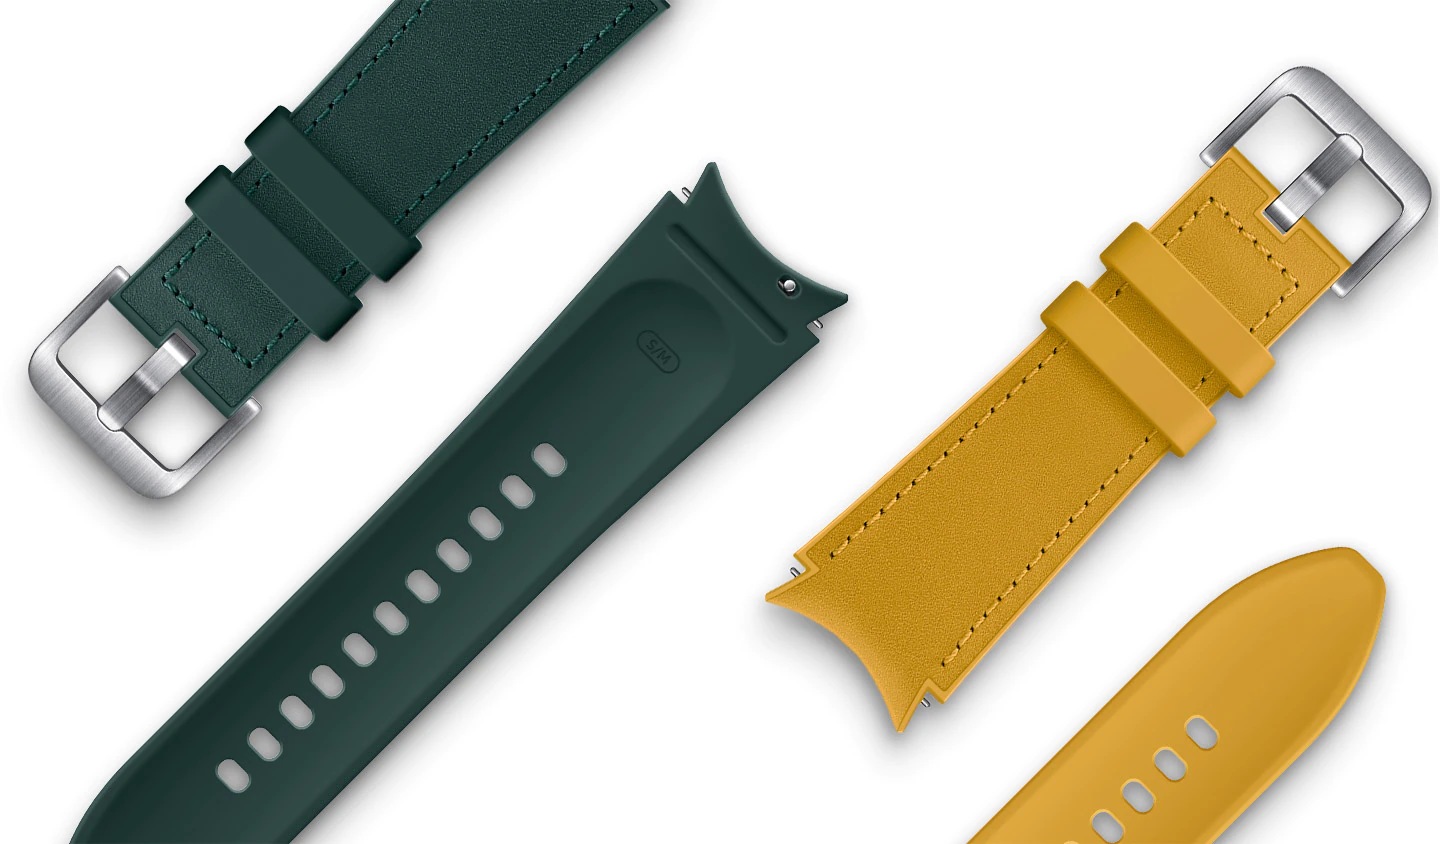 Two colors of Hybrid Leather Bands are placed diagonally and detached from the watch. On the left is a Green color band showing its outer leather material and inner fluoroelastomer material side by side. On the right is a Mustard color band also showing its outer leather material and inner fluoroelastomer material side by side.